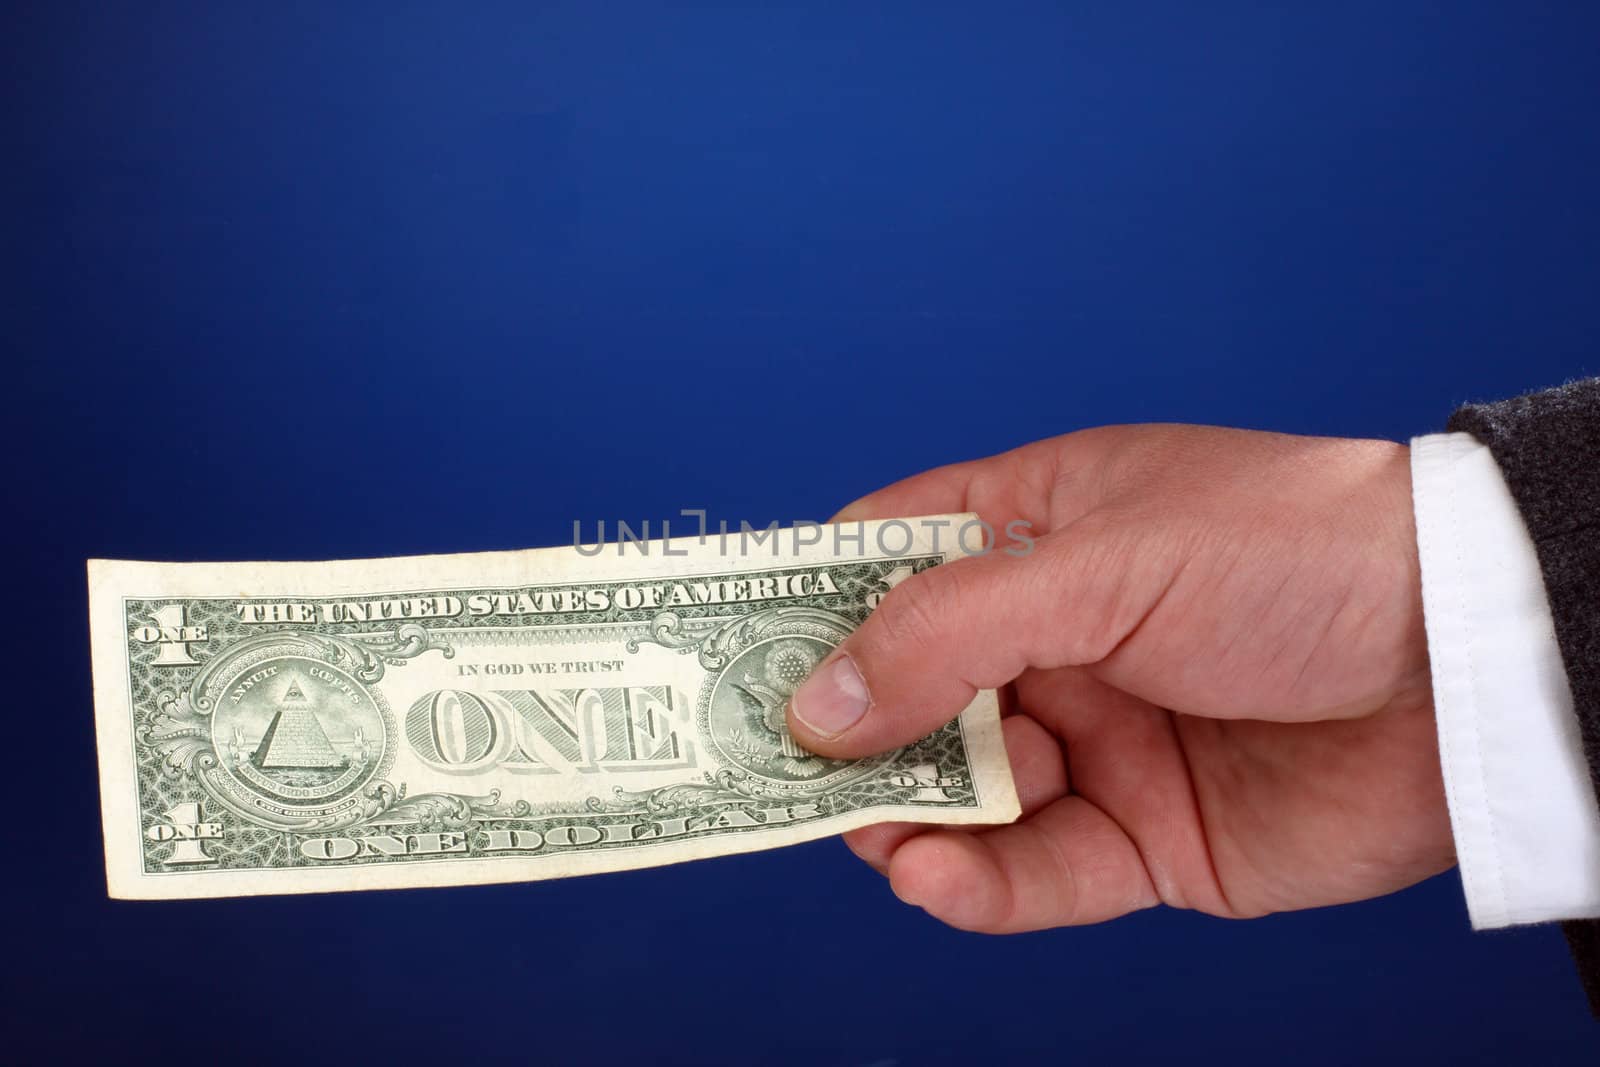  male hand holding a one dollar bill